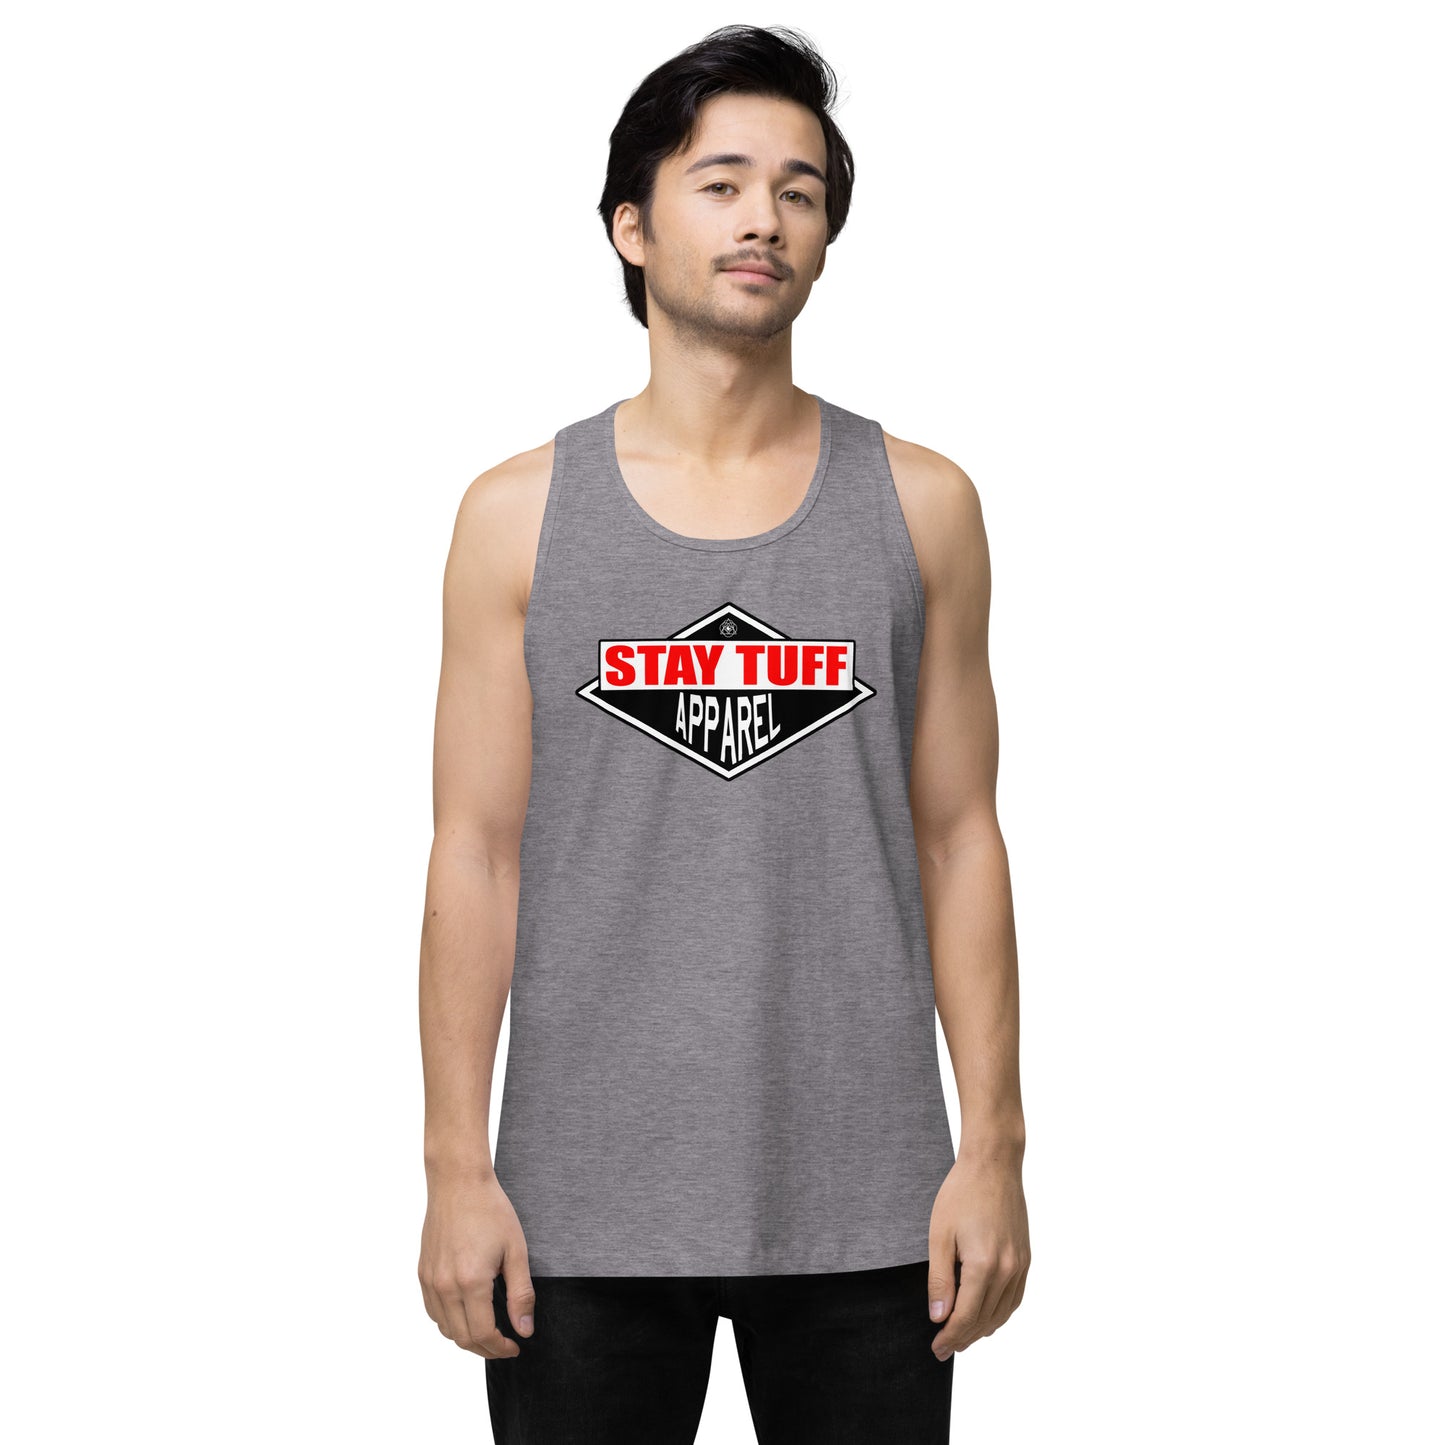 THE NEW STYLE (Men’s Tank Top)